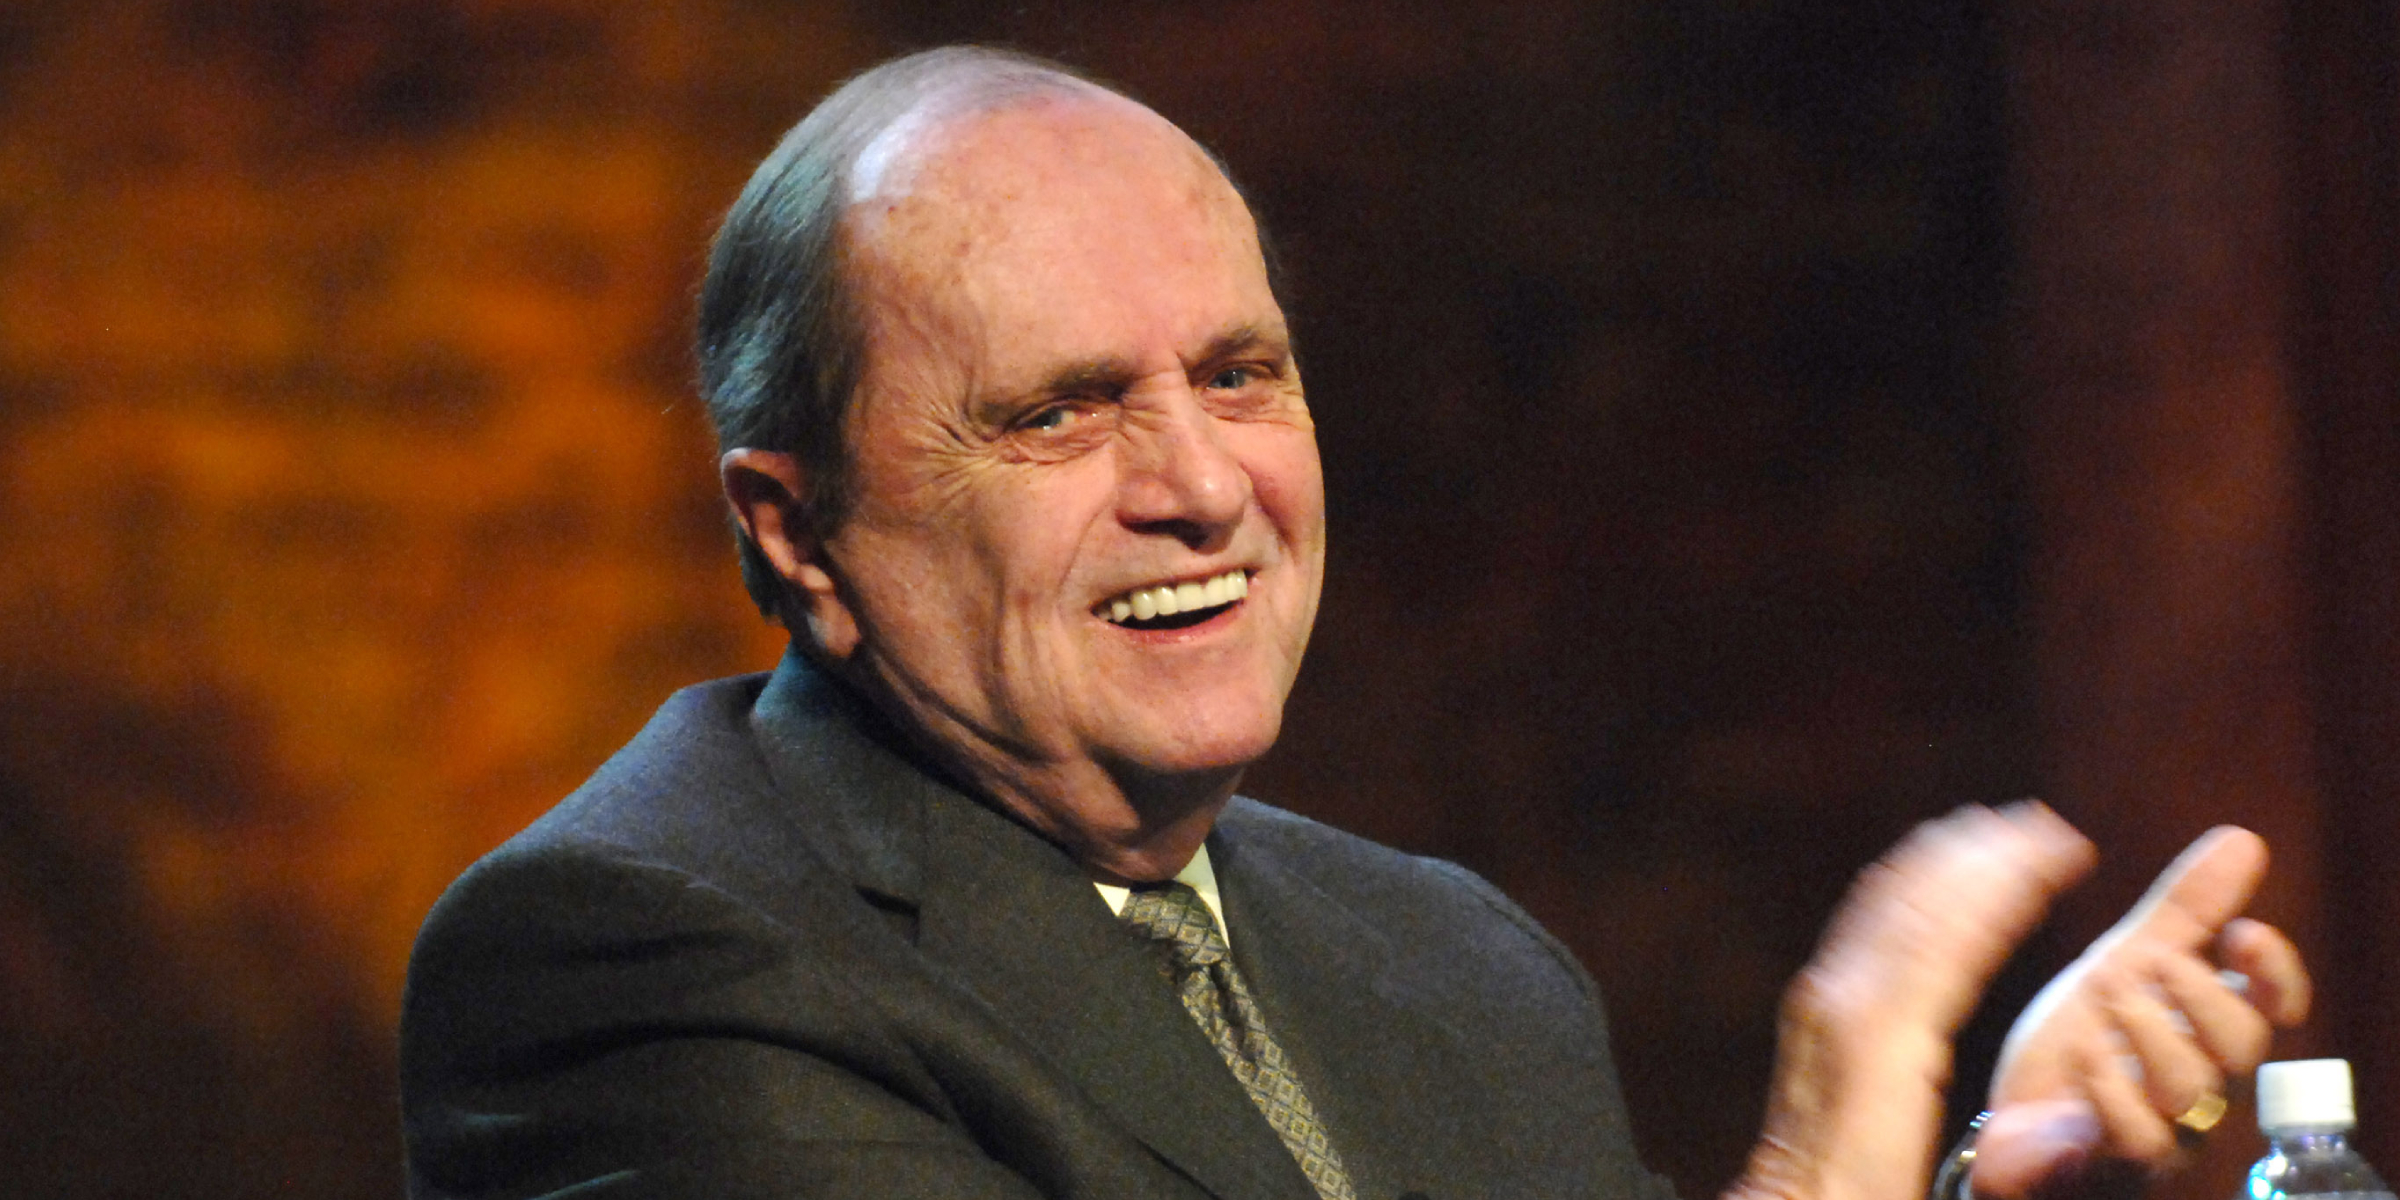 Bob Newhart | Source: Getty Images